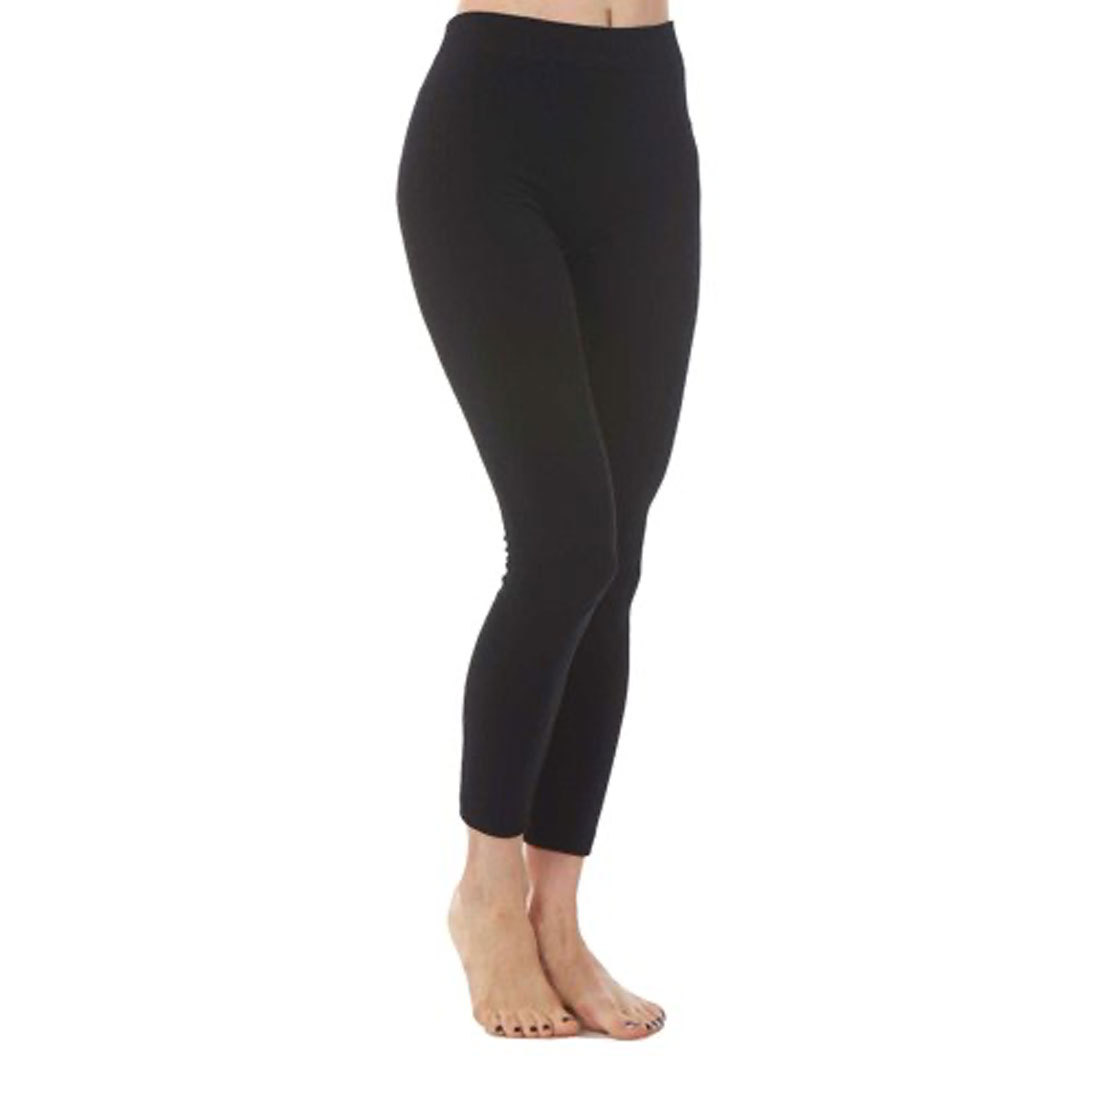 Cable Fleece Legging, Footless Tights: Foot Traffic